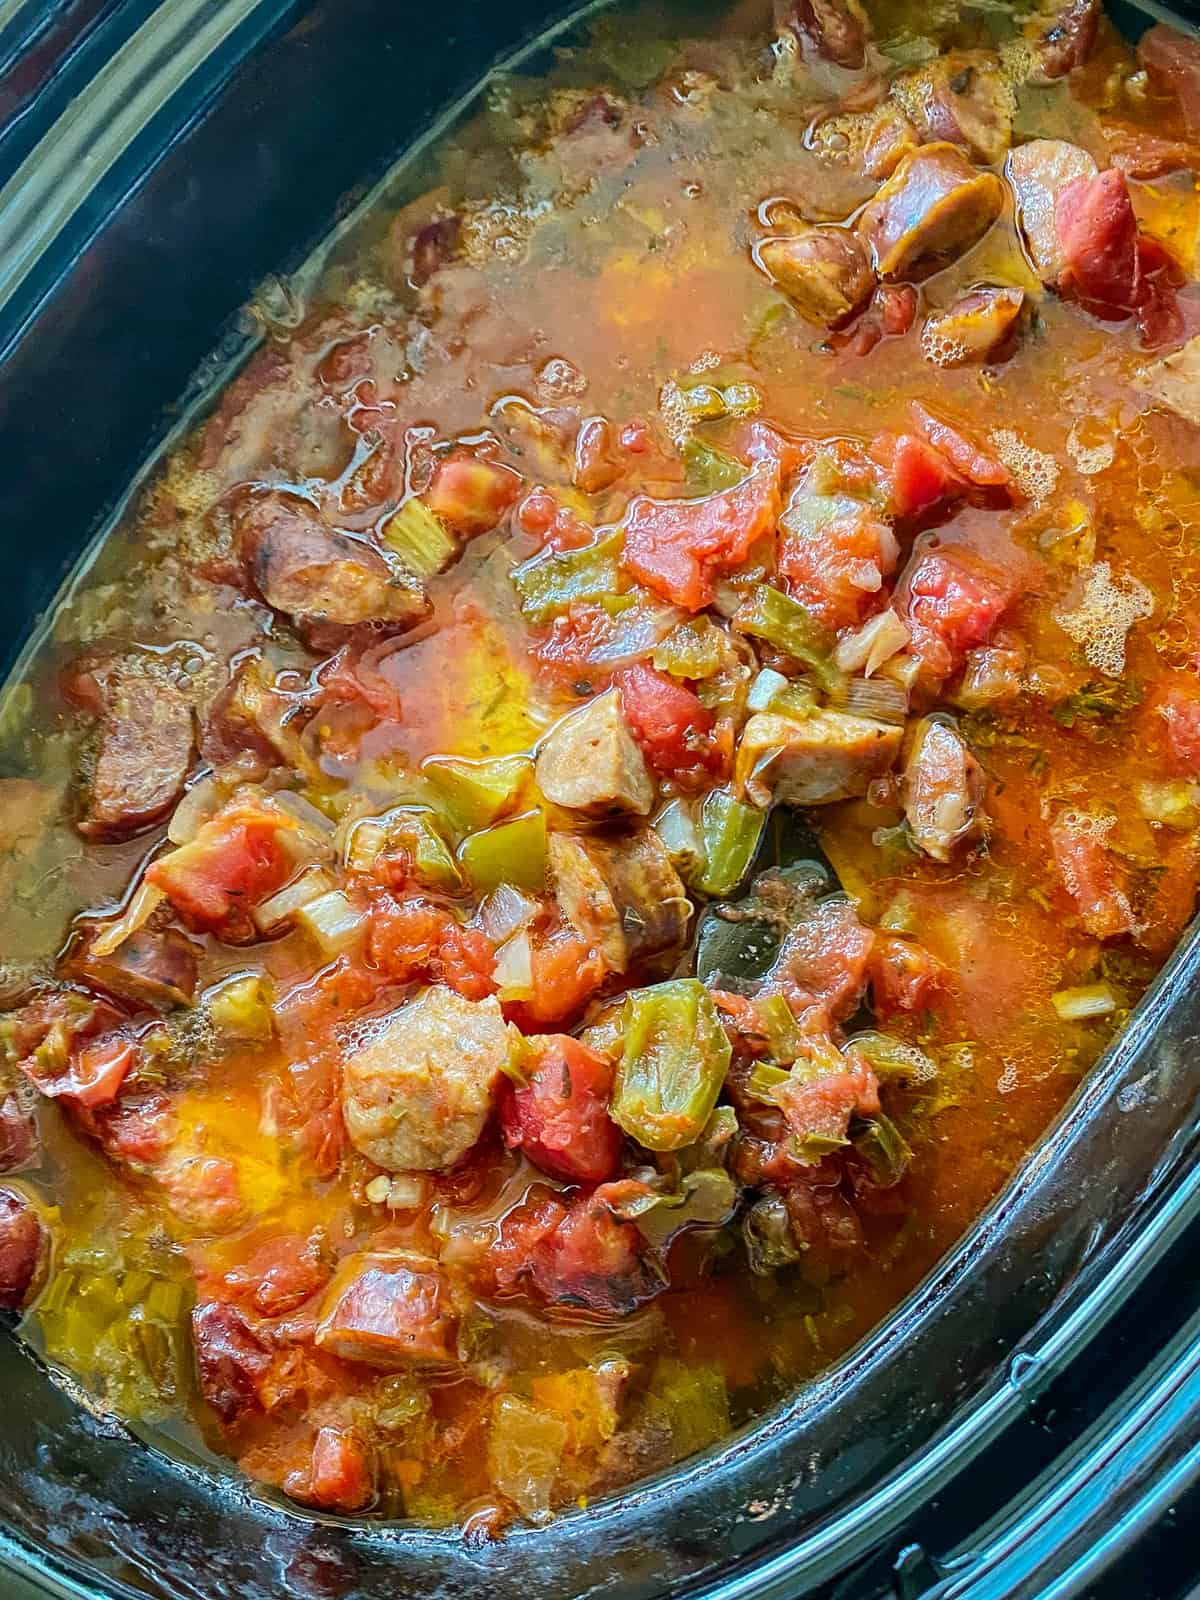 Black oval slow cooker with sausage and vegetables.